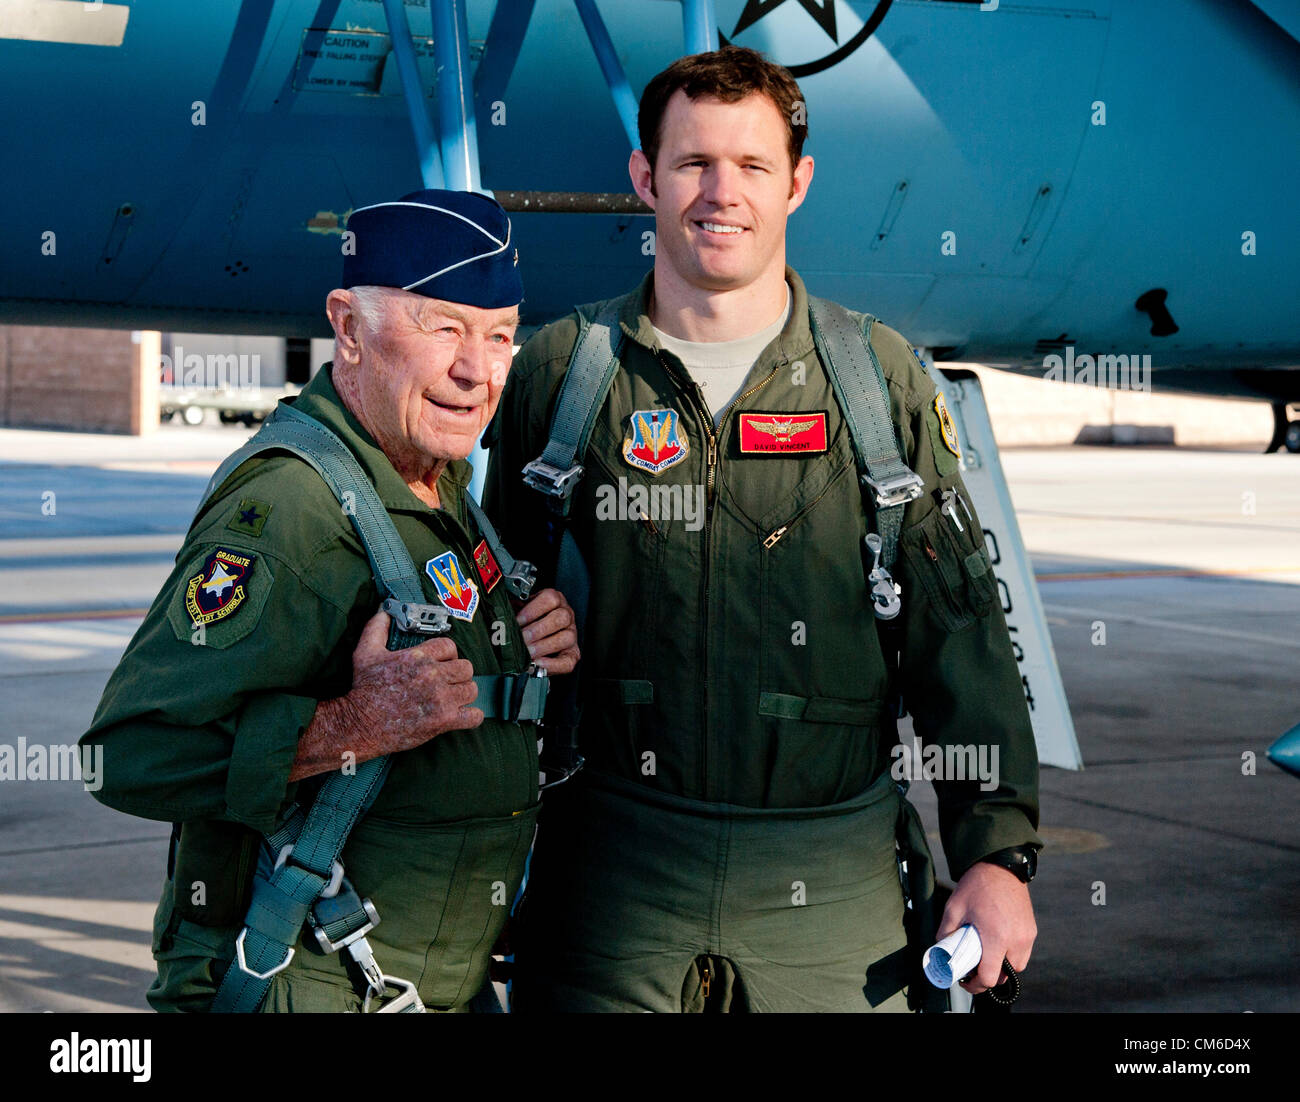 Retired United States Air Force Brig. Gen. Chuck Yeager, 89, with Air Force pilot Capt. David Vincent before boarding an F-15D Eagle fighter aircraft to celebrate the 65th anniversary of becoming the first person to break the sound barrier October 14, 2012, at Nellis Air Force Base, Nevada. In 1947 Yeager broke the sound barrier in a Bell XS-1 rocket research plane named Glamorous Glennis. Stock Photo